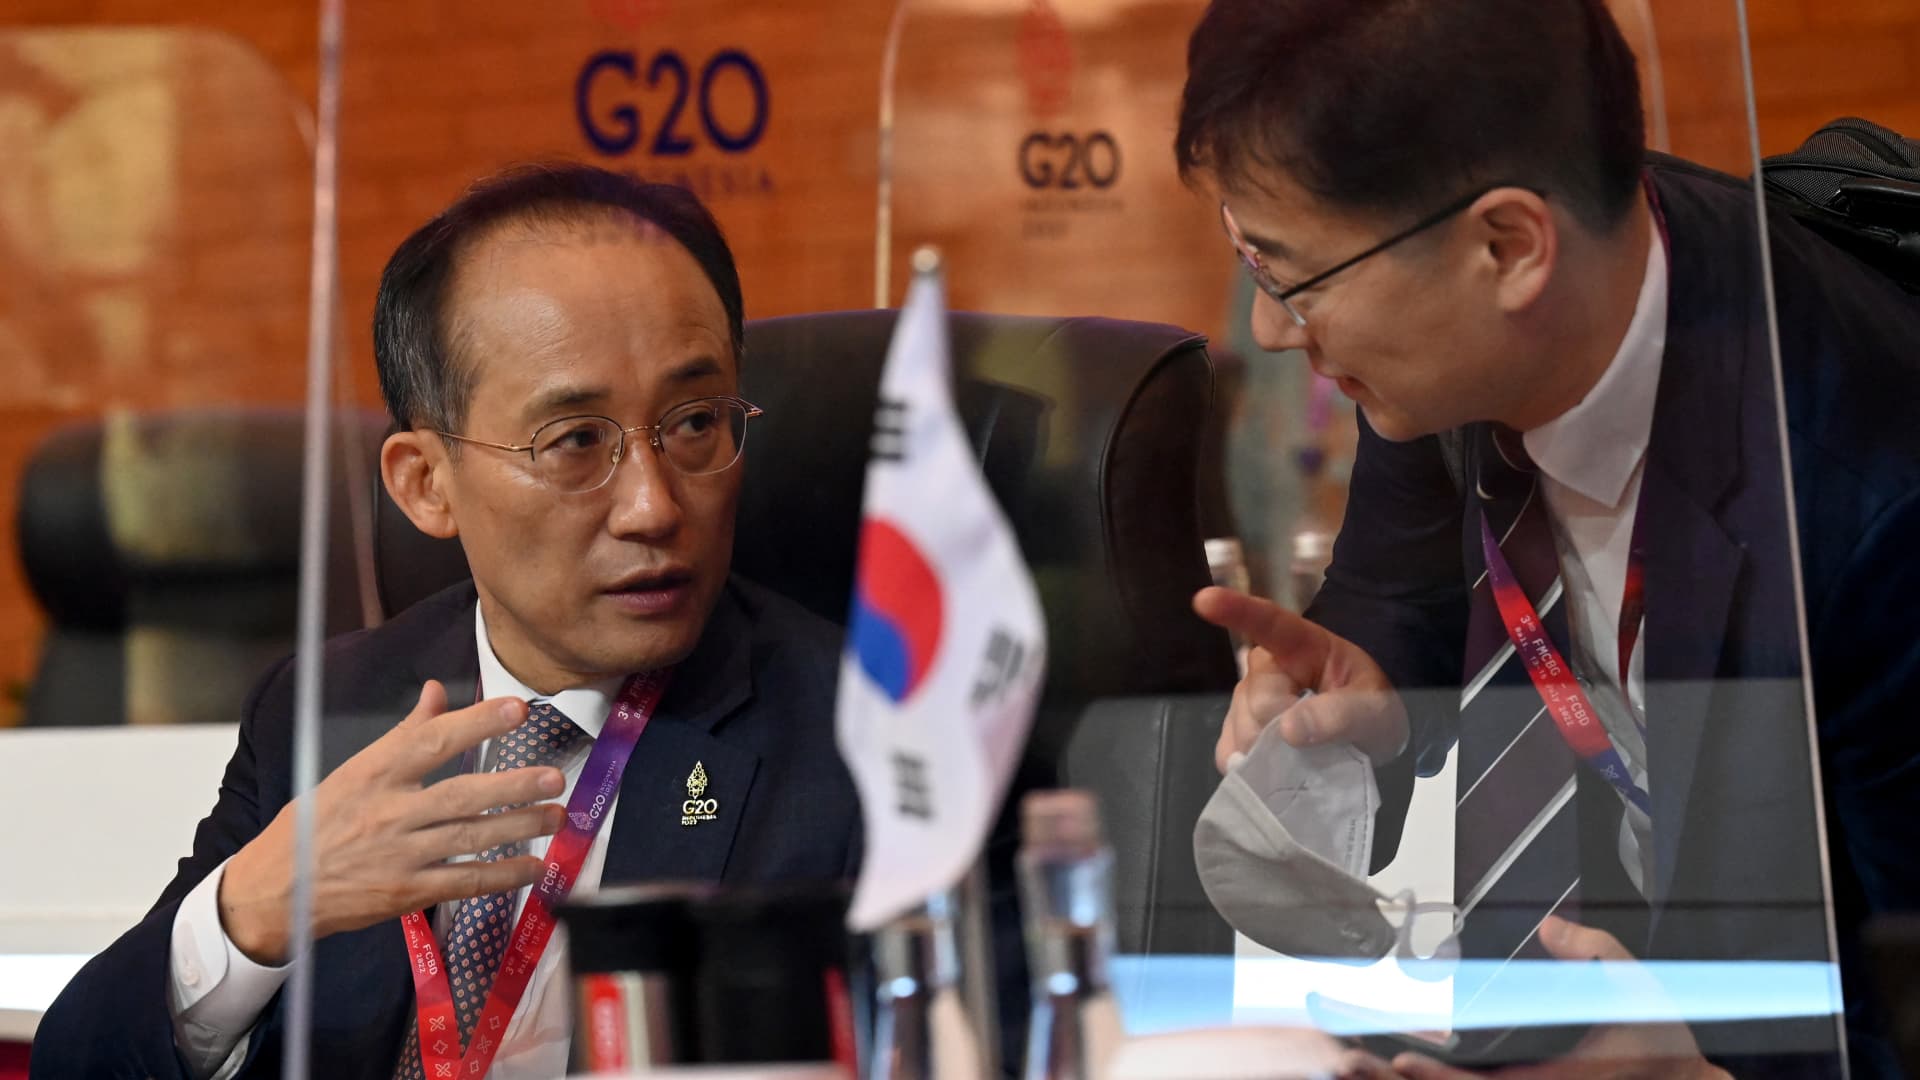 South Korea Deputy Prime Minister and Minister of Economy and Finance Choo Kyung-ho speaks with his staff attending the G-20 Finance Ministers Meeting in Bali, Indonesia on July 16, 2022.